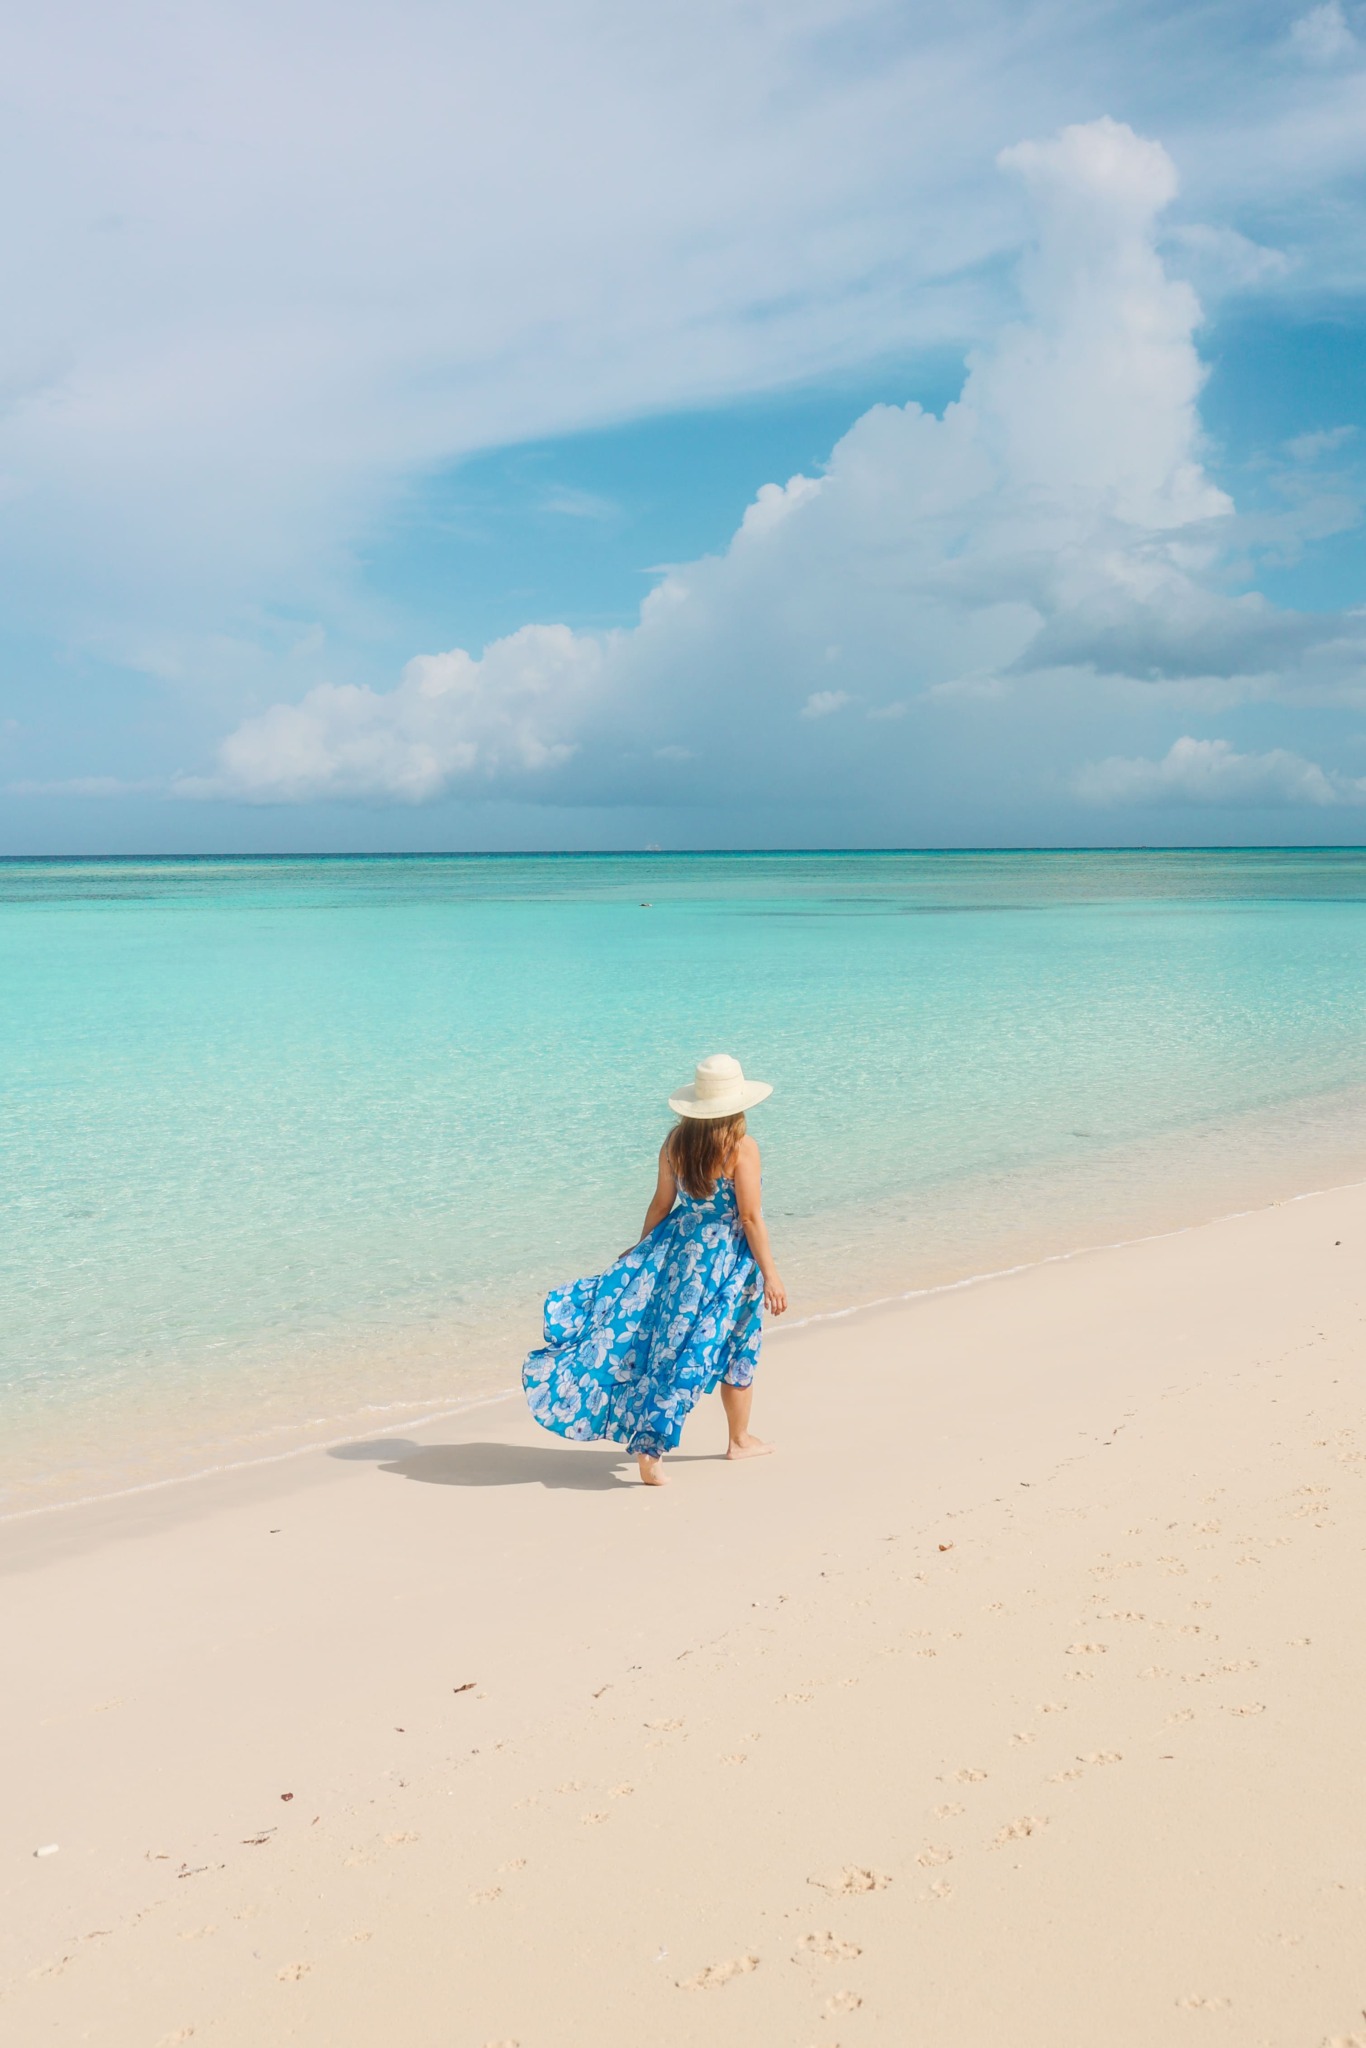 Turks and Caicos beach guide. Photography by Jaz Wanderlust.